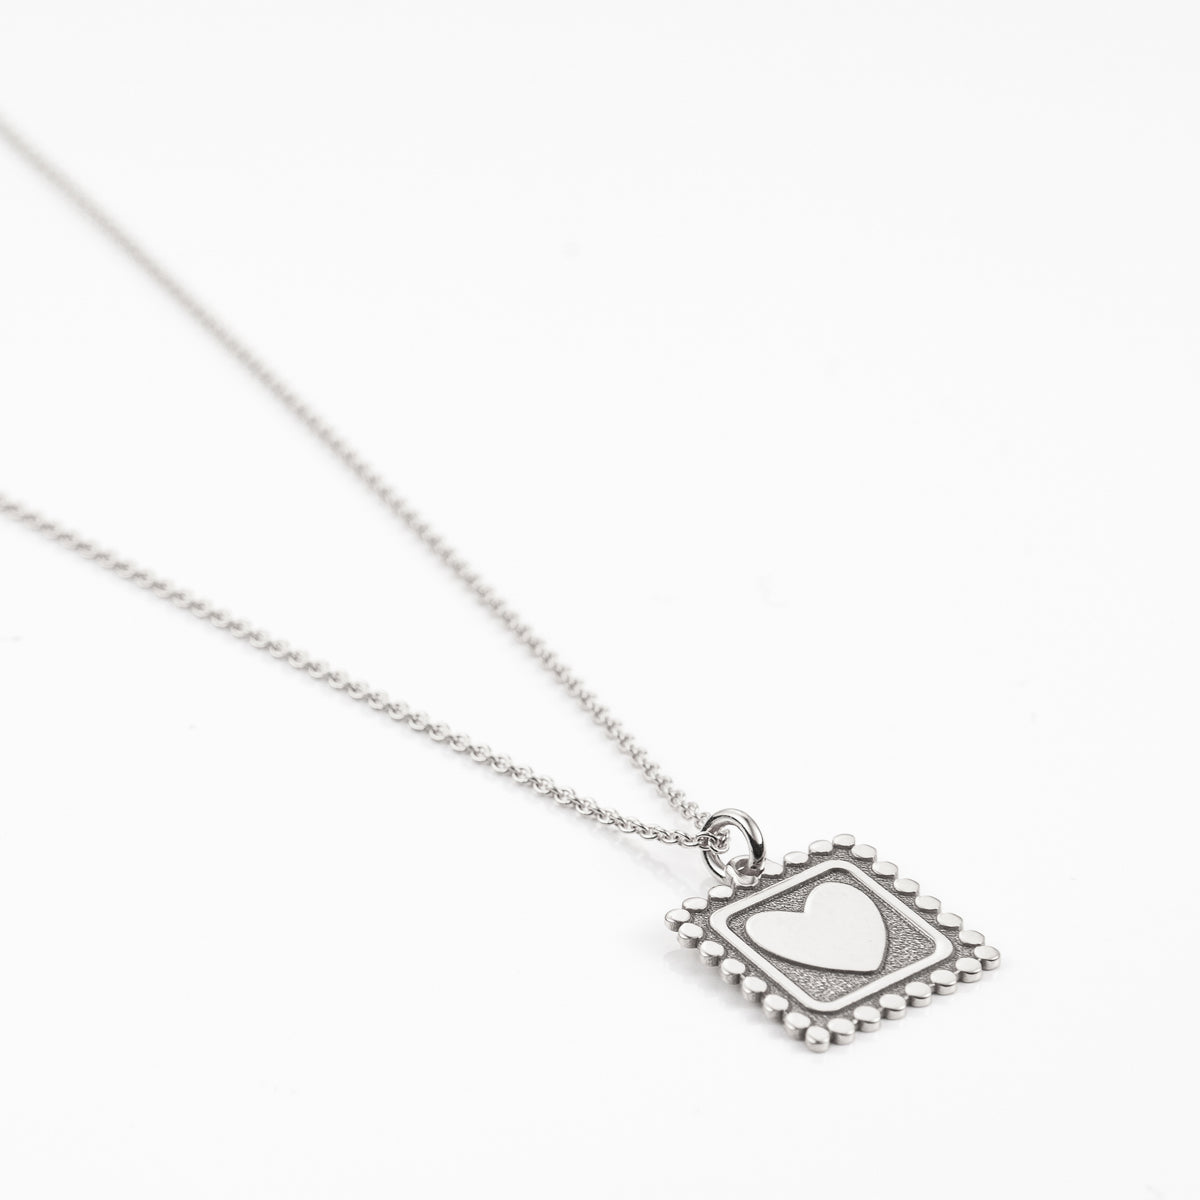 Lost in Love Necklace, 925 sterling silver